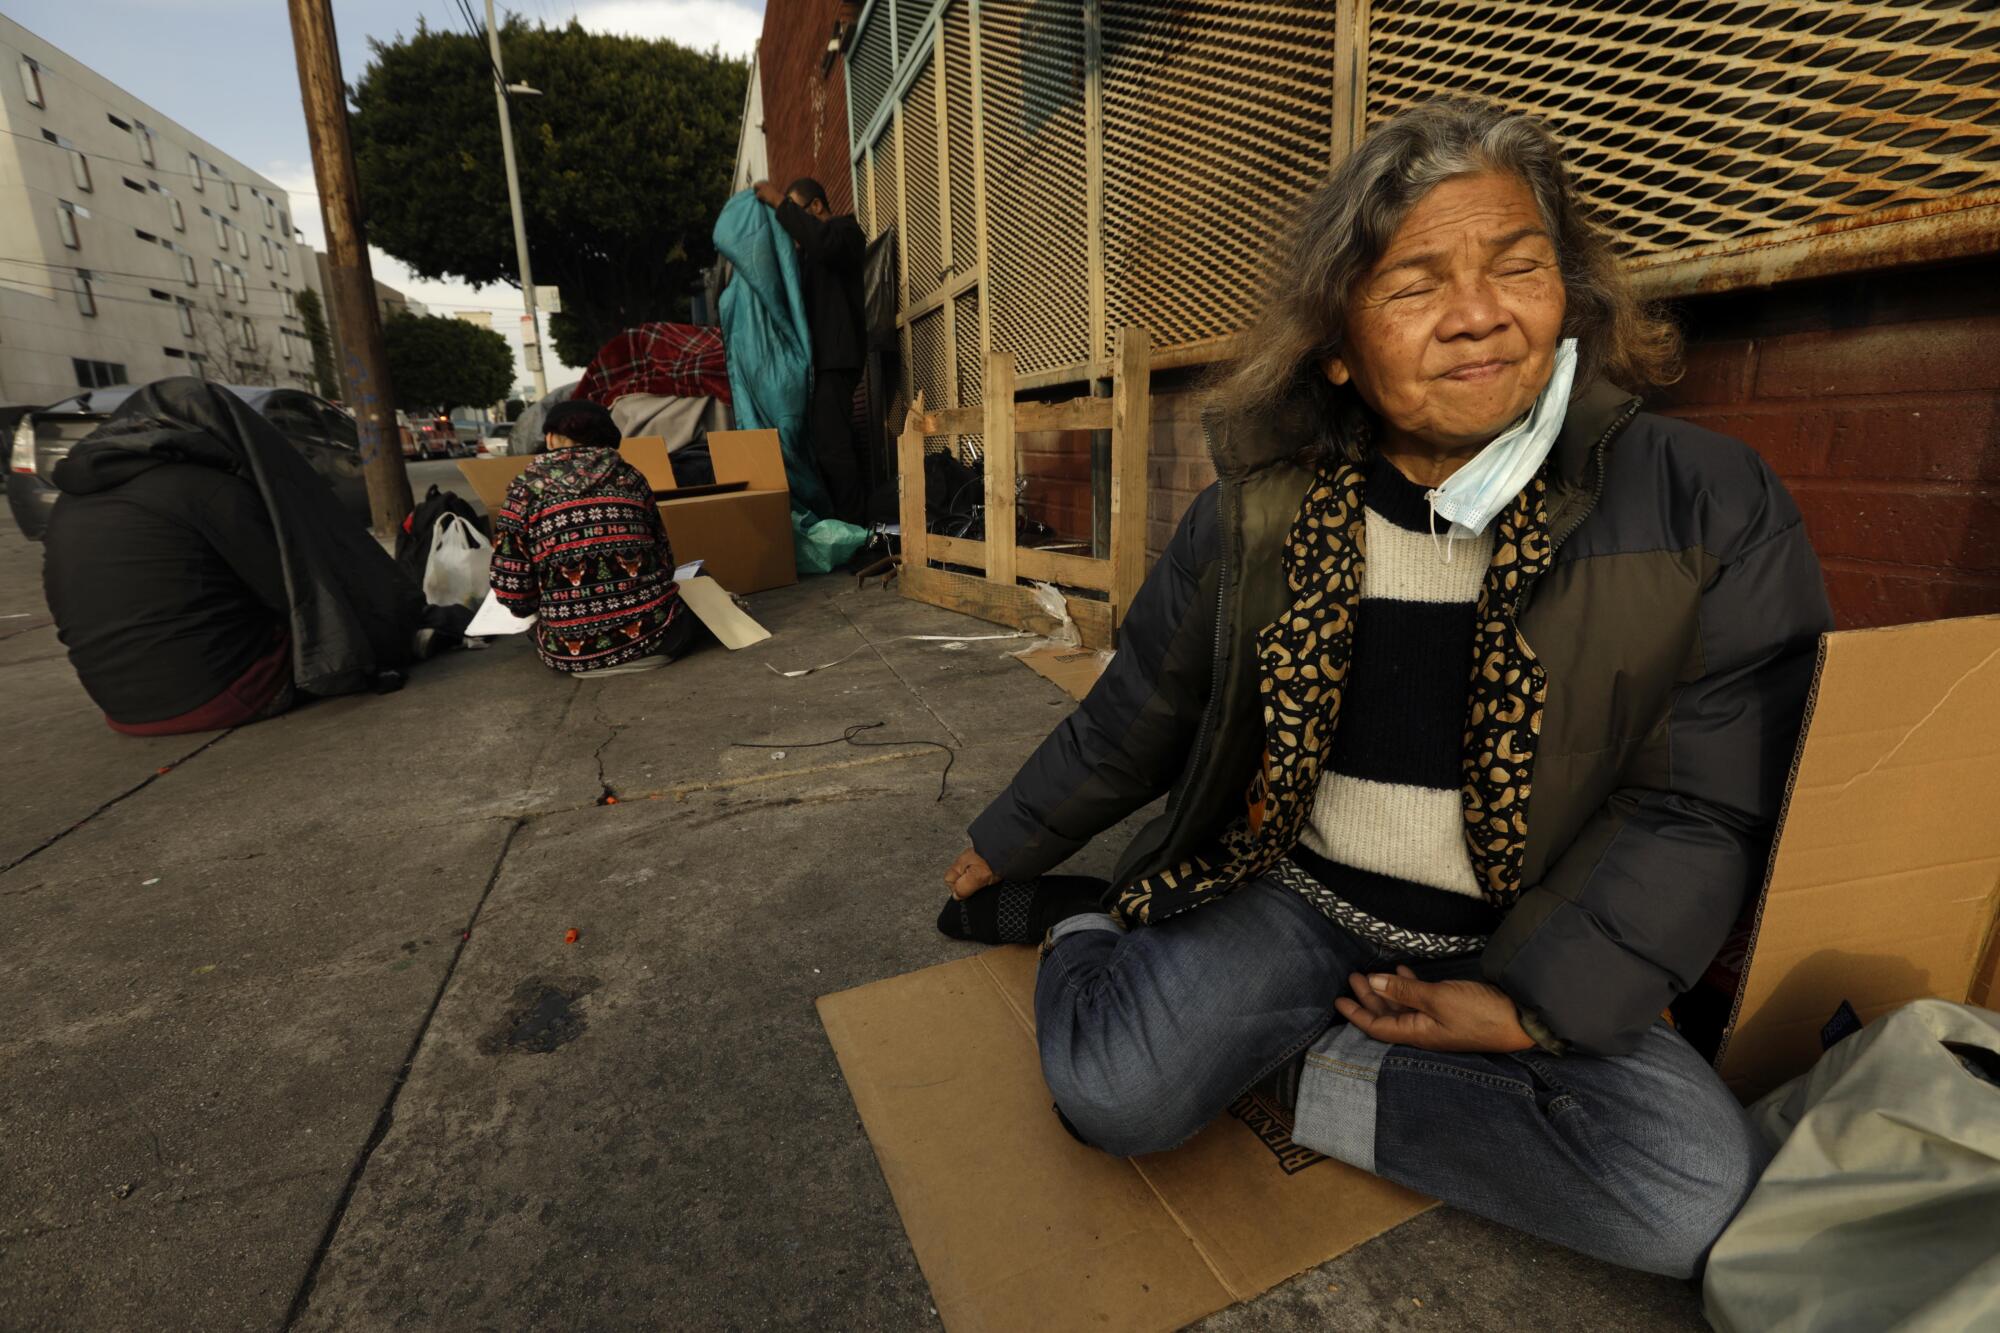 An older woman rests on a piece of cardboard that she uses to sleep on the sidewalk.